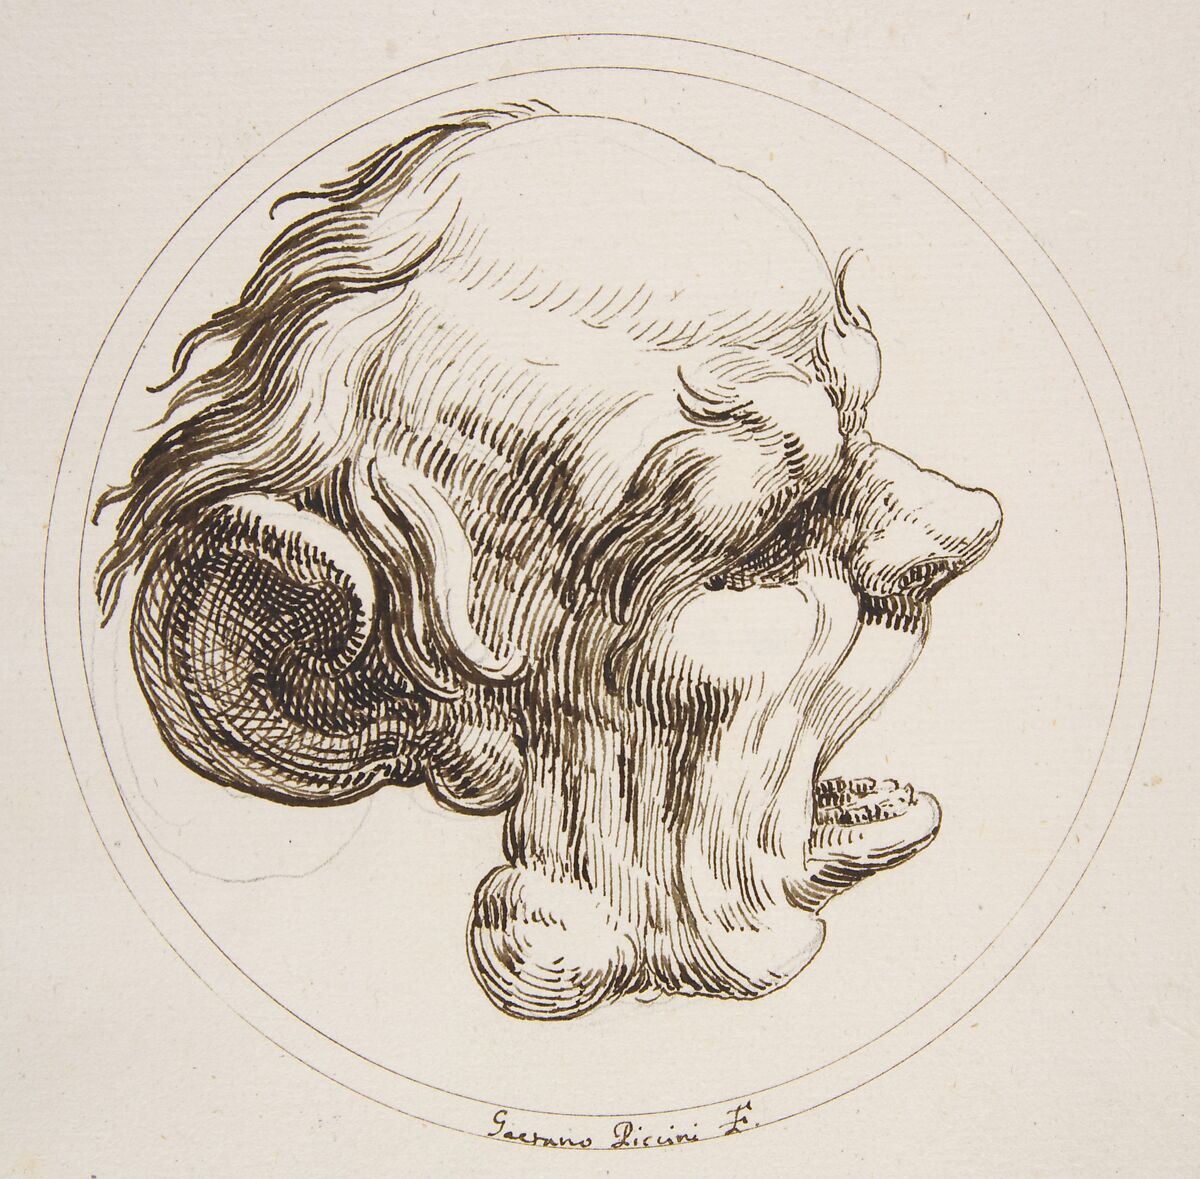 Gaetano Piccini | Grotesque Head With a Large Ear and an Open Mouth Looking  to the Right Within a Circle | The Metropolitan Museum of Art